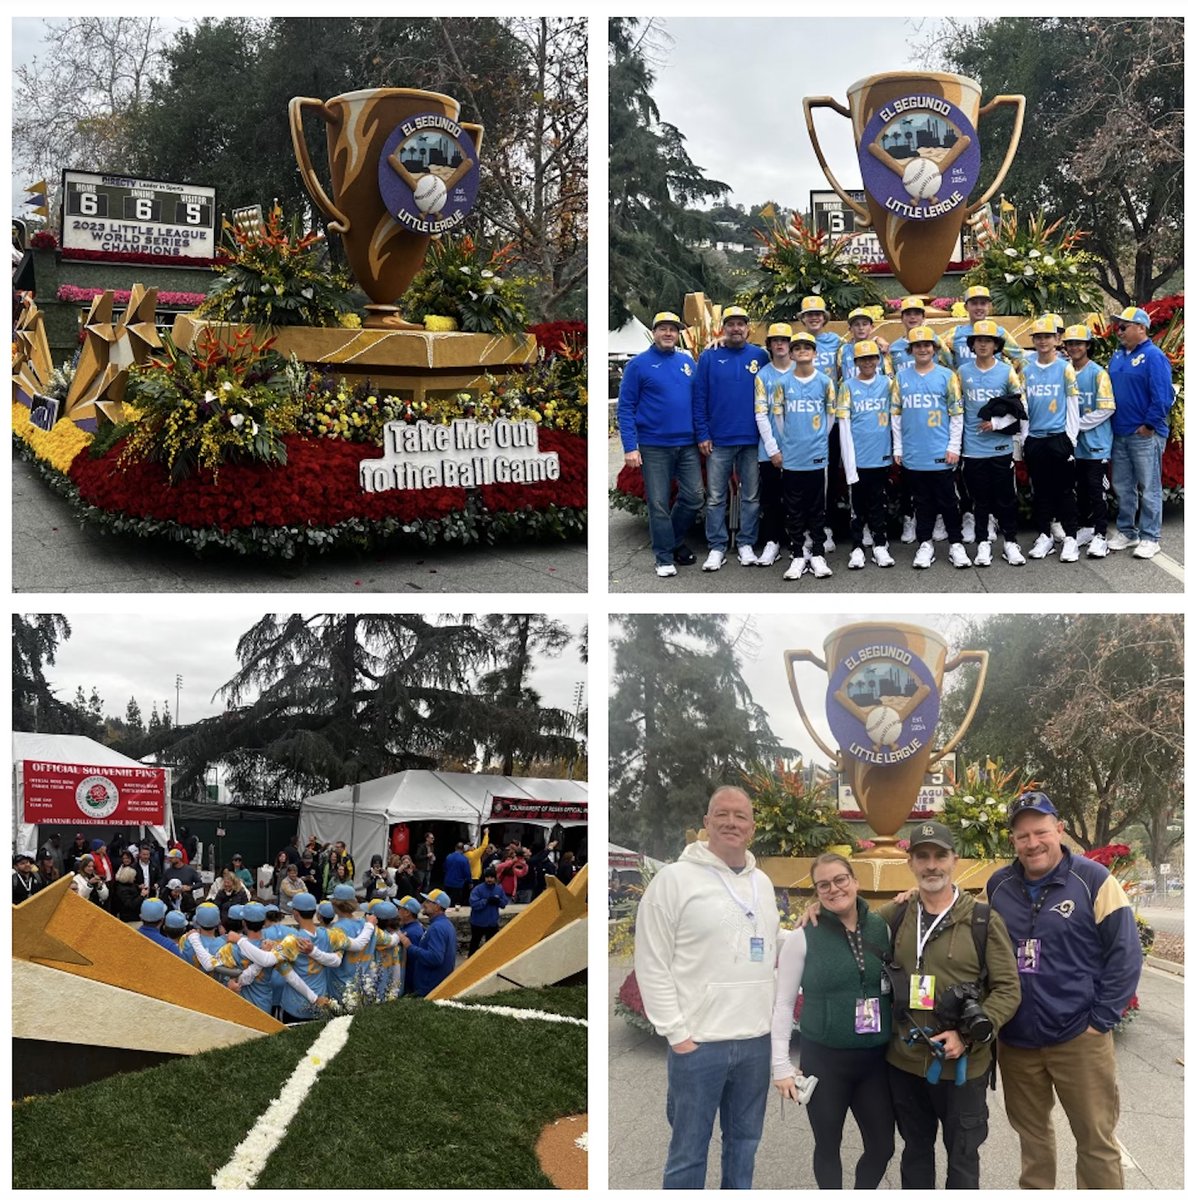 #SSDLNews - The LLWS Champion El Segundo Little League Direct TV float is set for the 135th Rose Parade. They are in the prime 36th position, in between Michigan and Alabama and directly following the Budweiser Clydesdales. Follow SSDL on social media. youtube.com/@SSDL/playlists